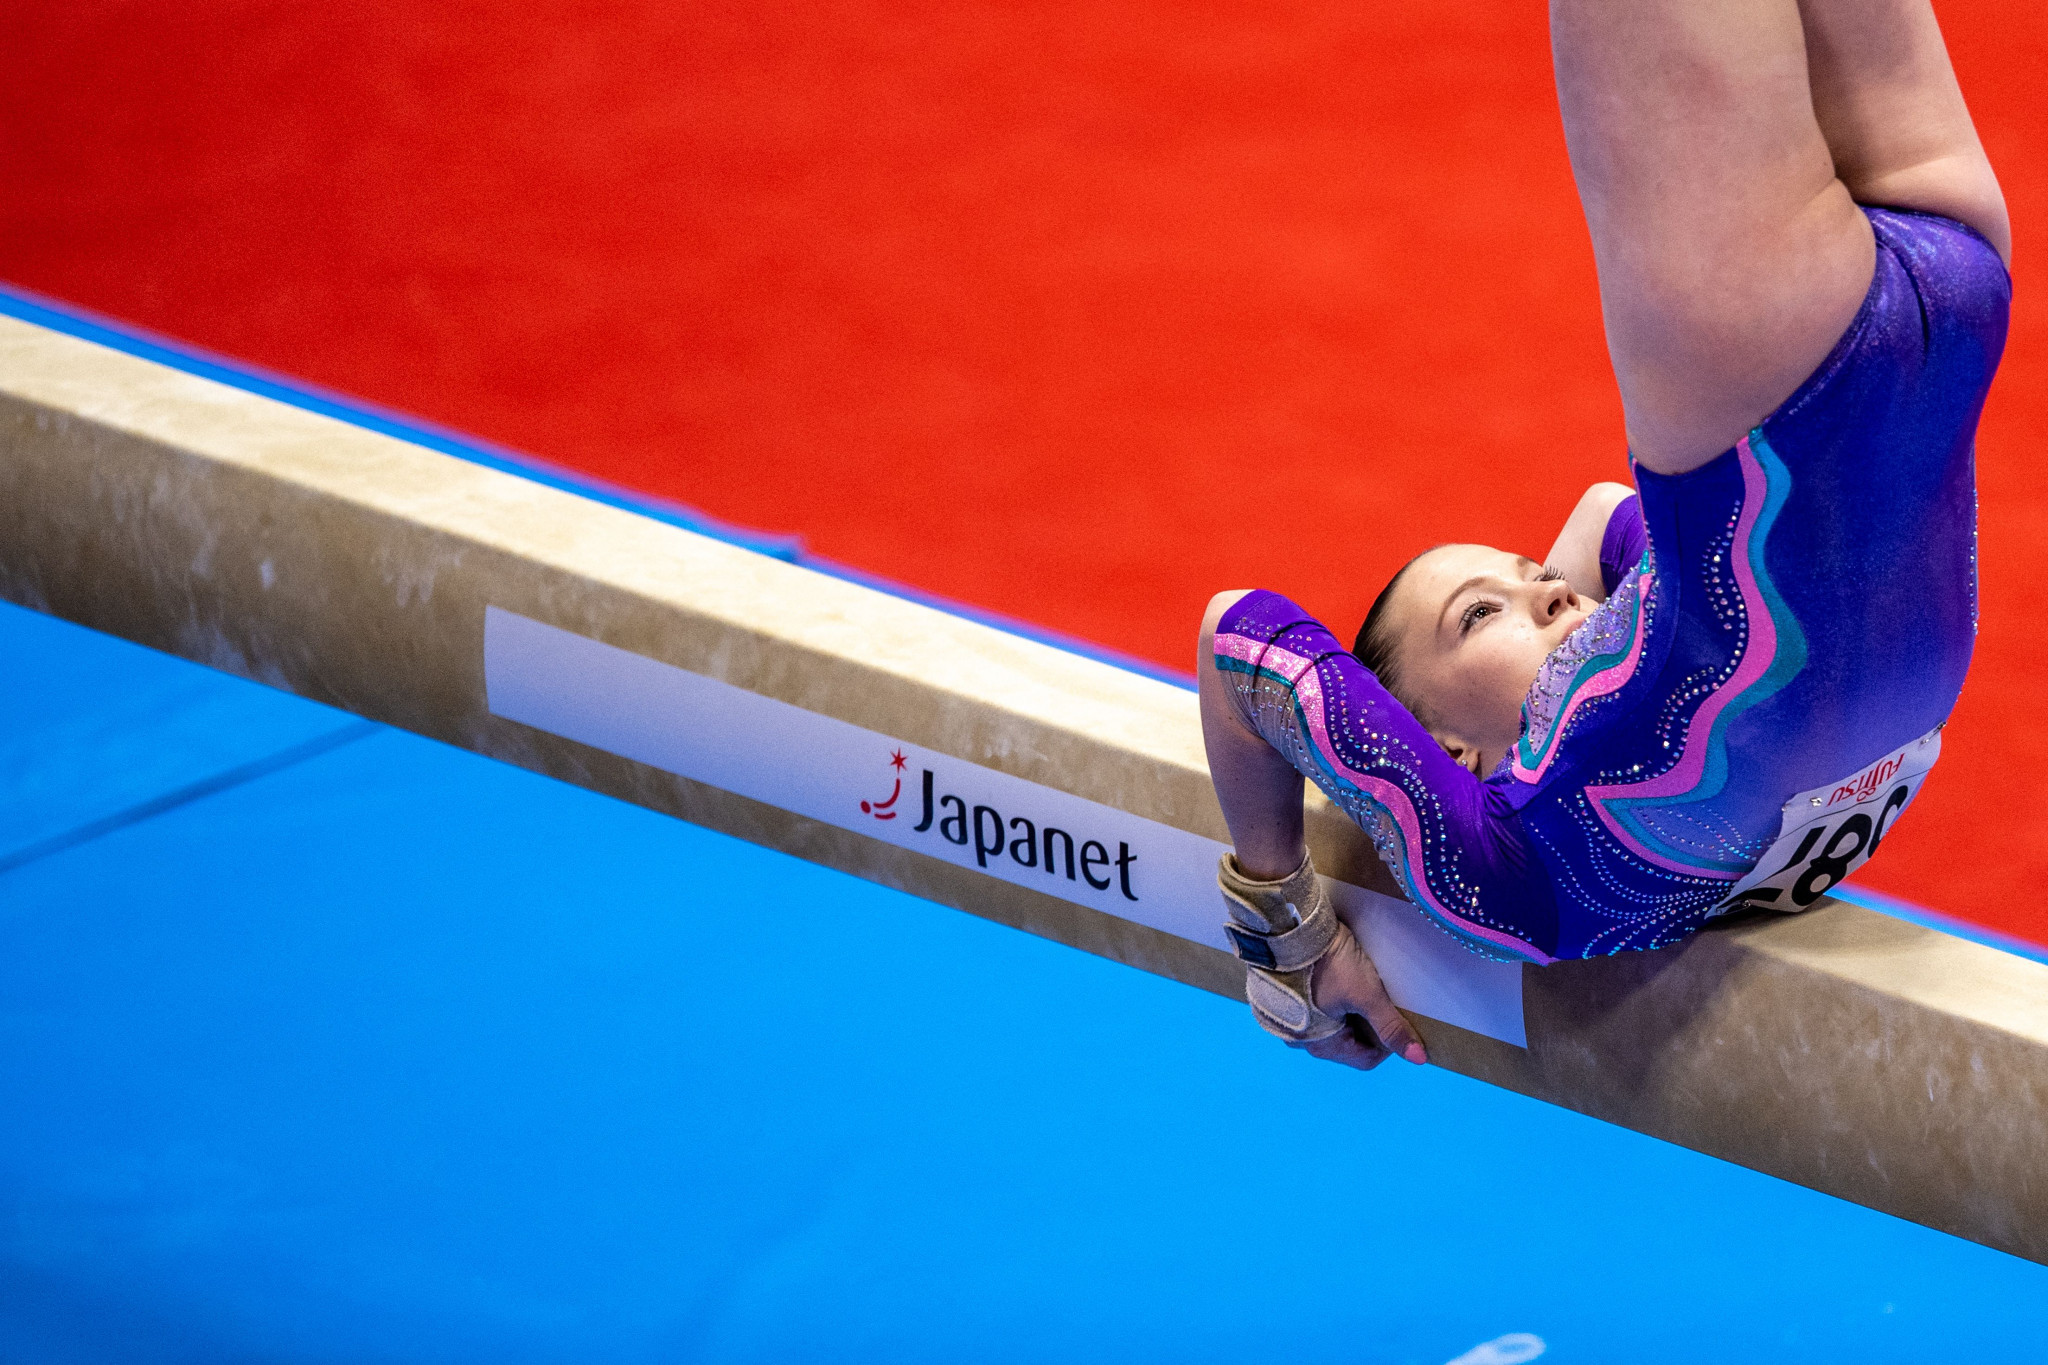 RGF's Urazova leads qualification in two disciplines at FIG World Cup in Doha